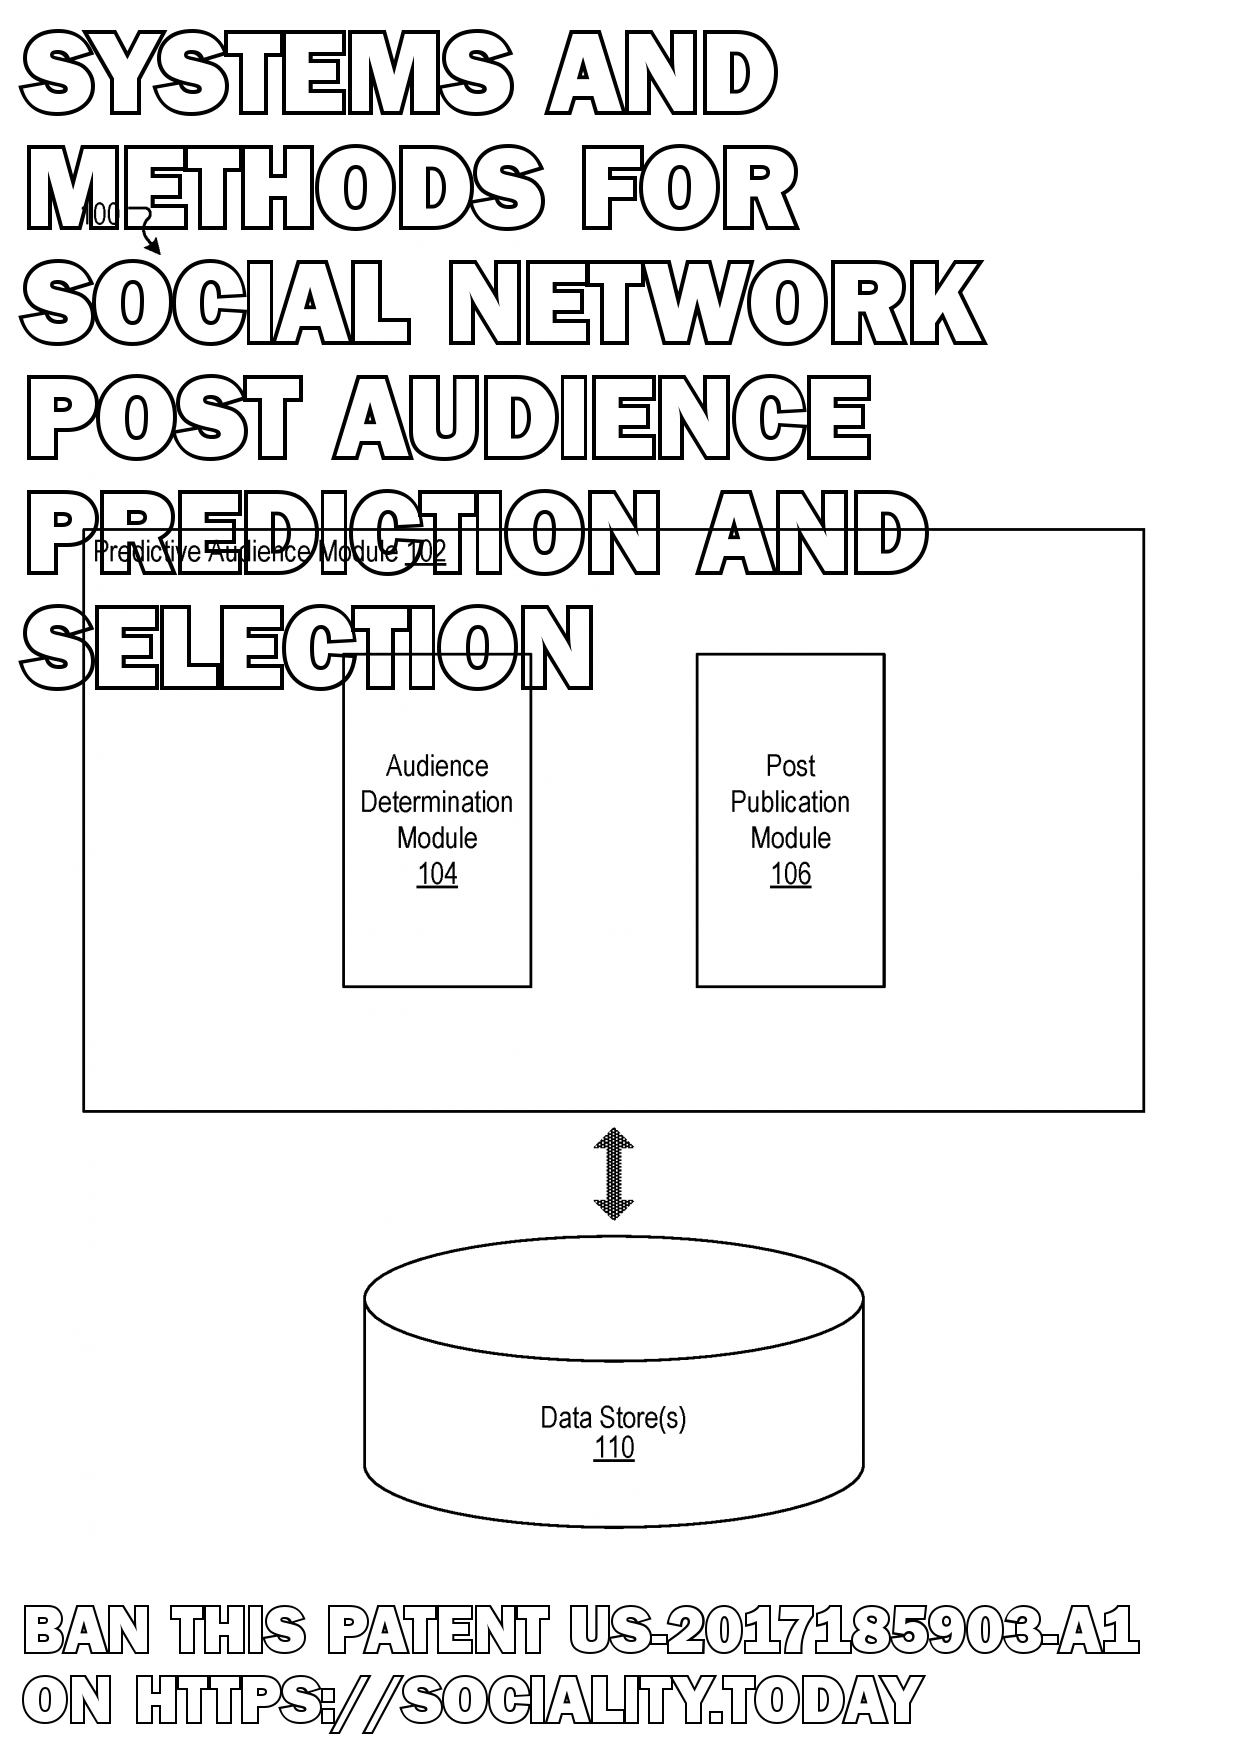 Systems and methods for social network post audience prediction and selection  - US-2017185903-A1